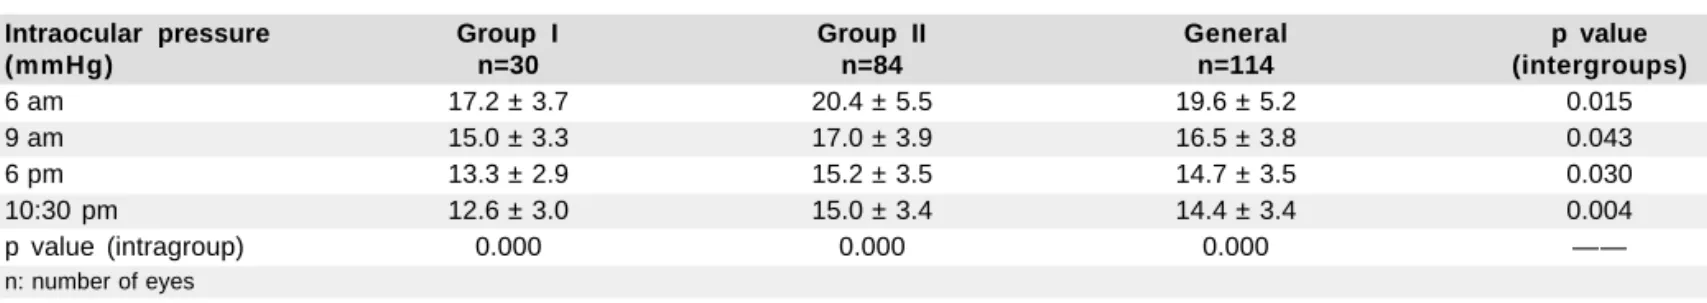 Table 1. Intraocular pressure (Mean ± SD) measured at different hours: sample stratified by group and general sample